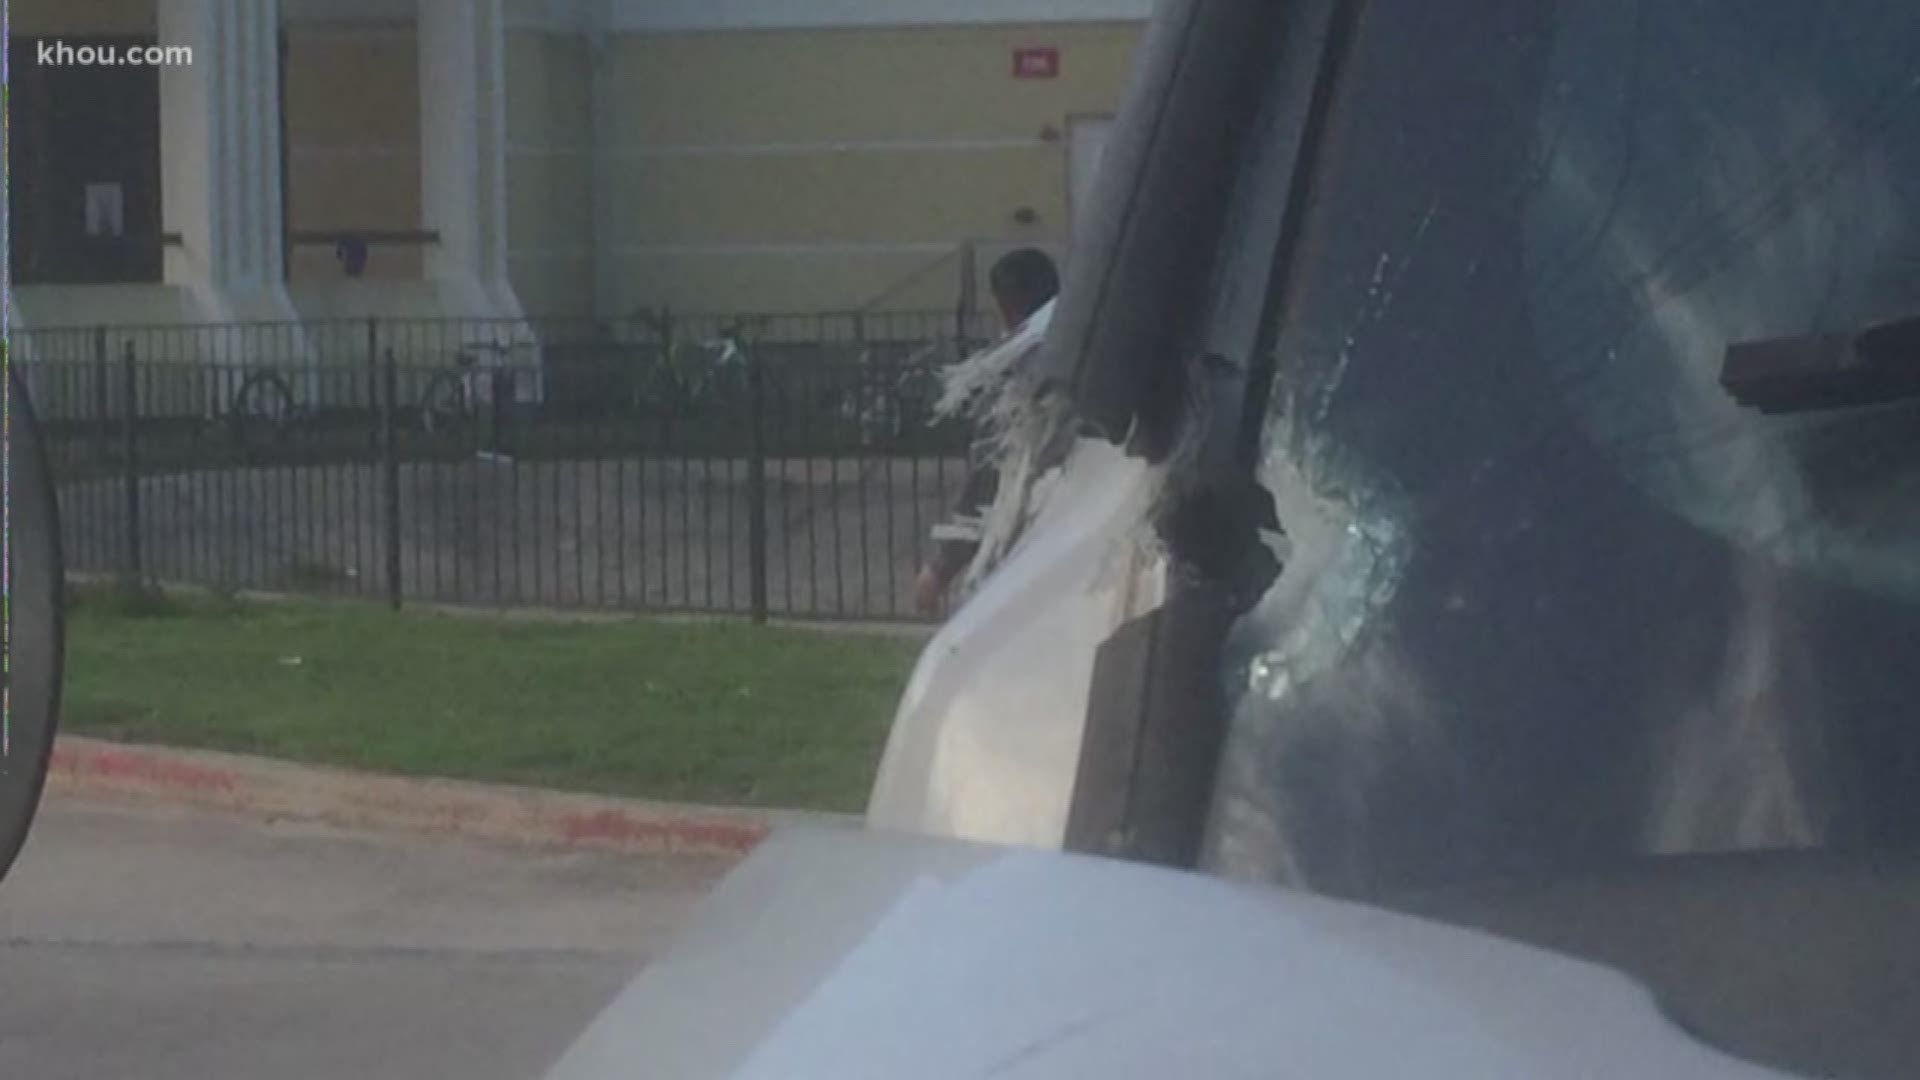 Security is being increased at a Katy mosque after someone fired shots at it early Monday.